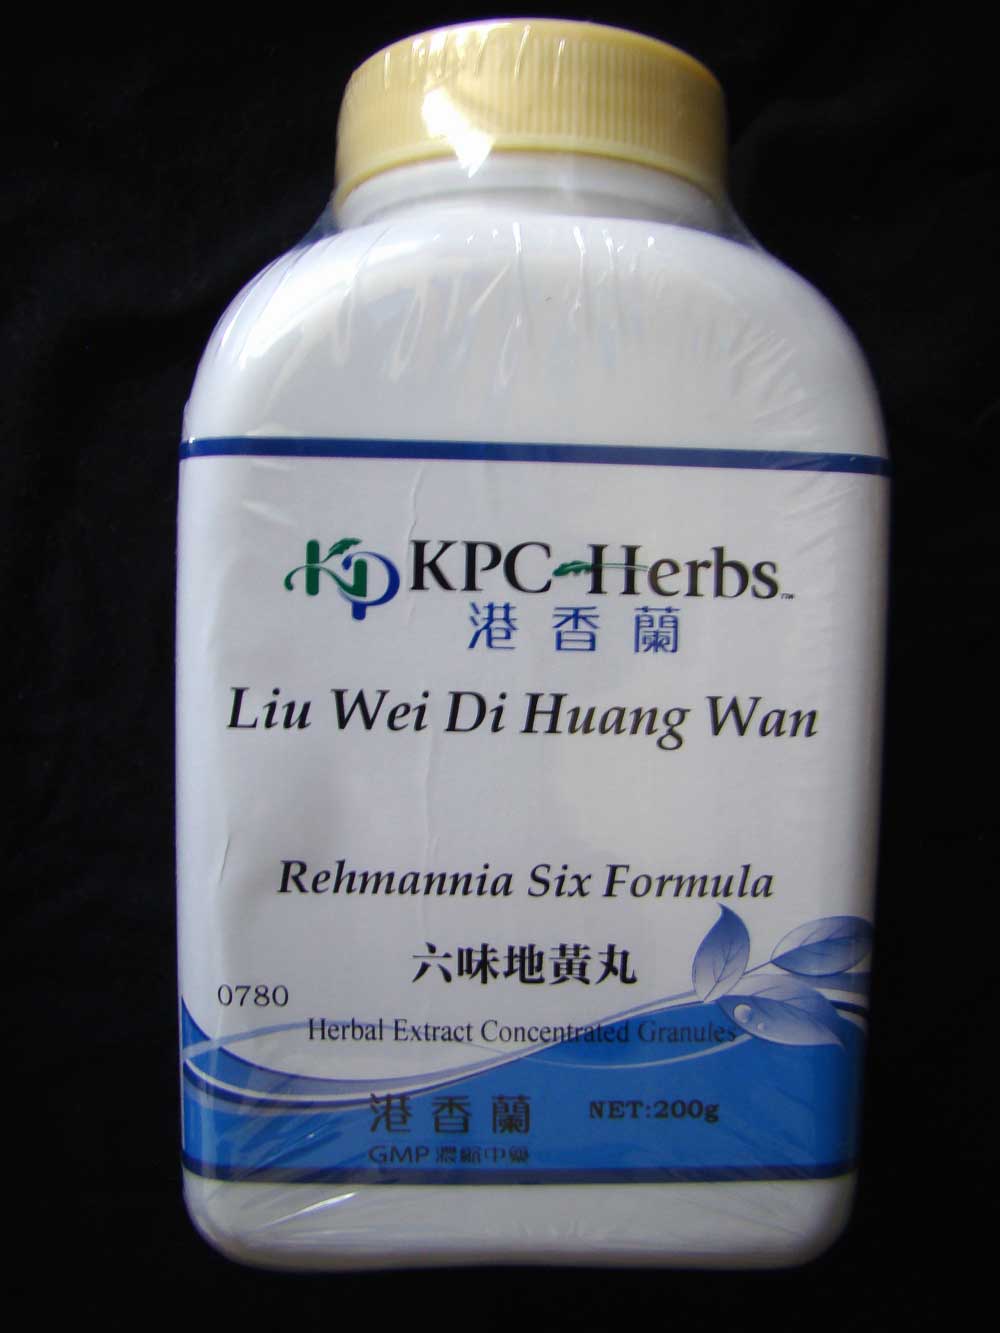 kpc chinese herbs KPC Chinese Herbal Medicine Products 5:1 Granules - GMP